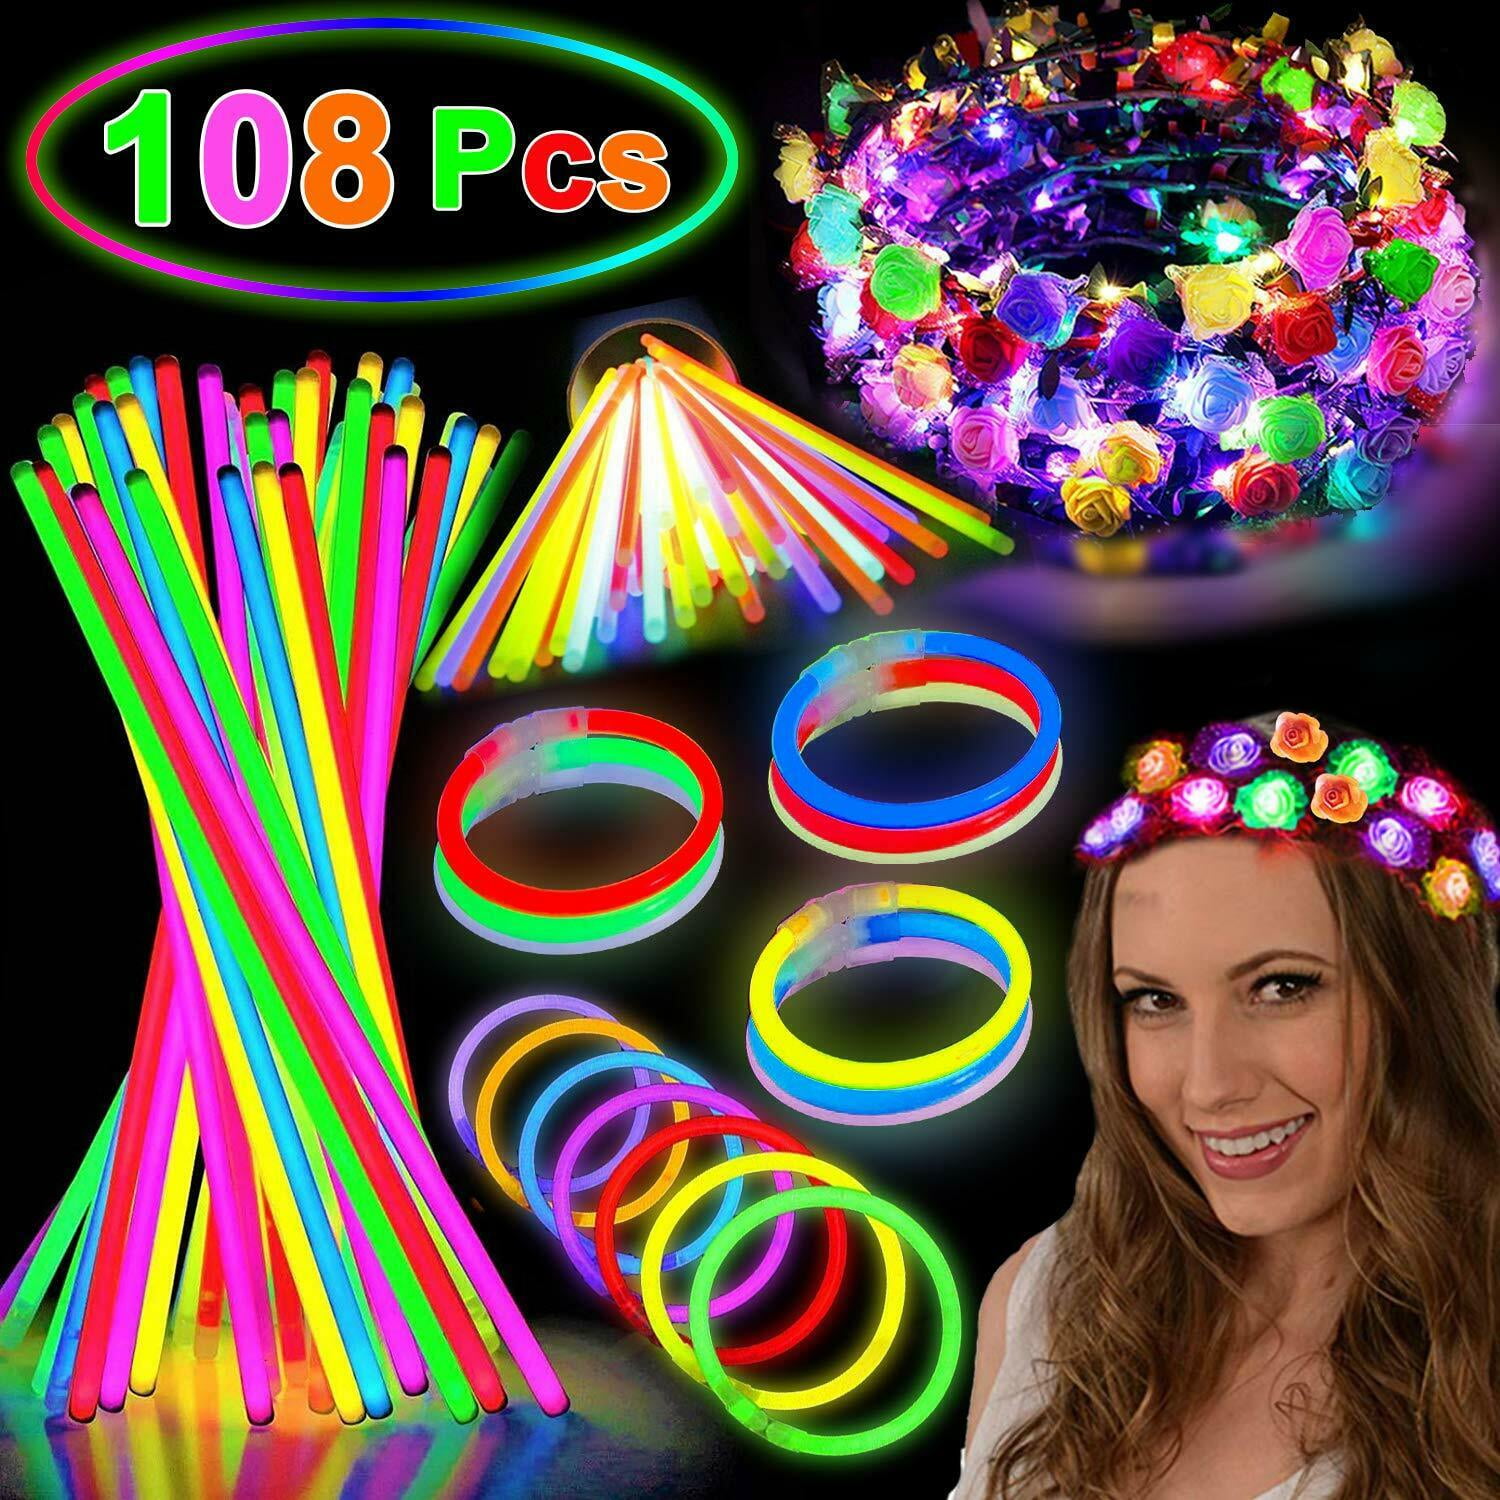 Toysery Glow in The Dark Party Supplies 140 Pieces - 20 Light Up Glasses, 20 Foam Light Sticks and 100 Neon Glow Sticks LED Light Up Party Favors